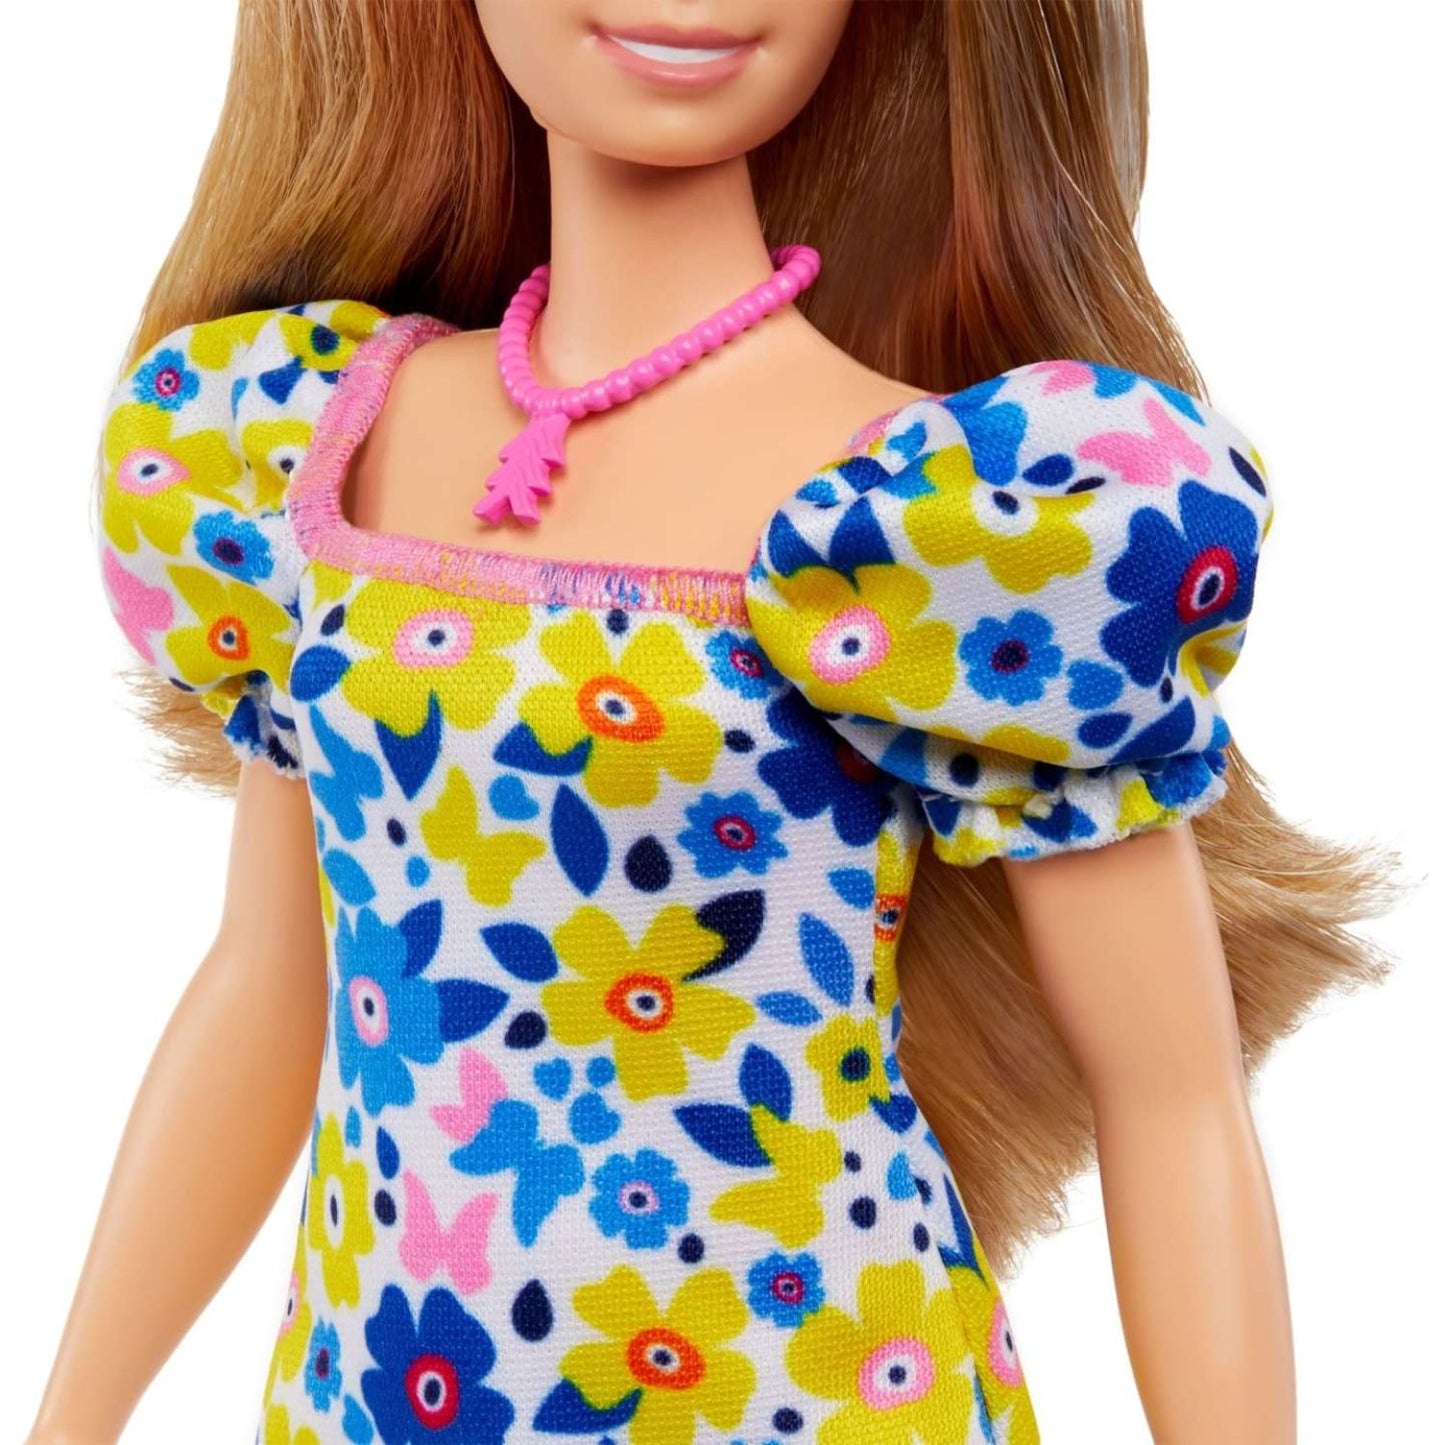 Mattel - Barbie Fashionistas with Down Syndrome HJT05